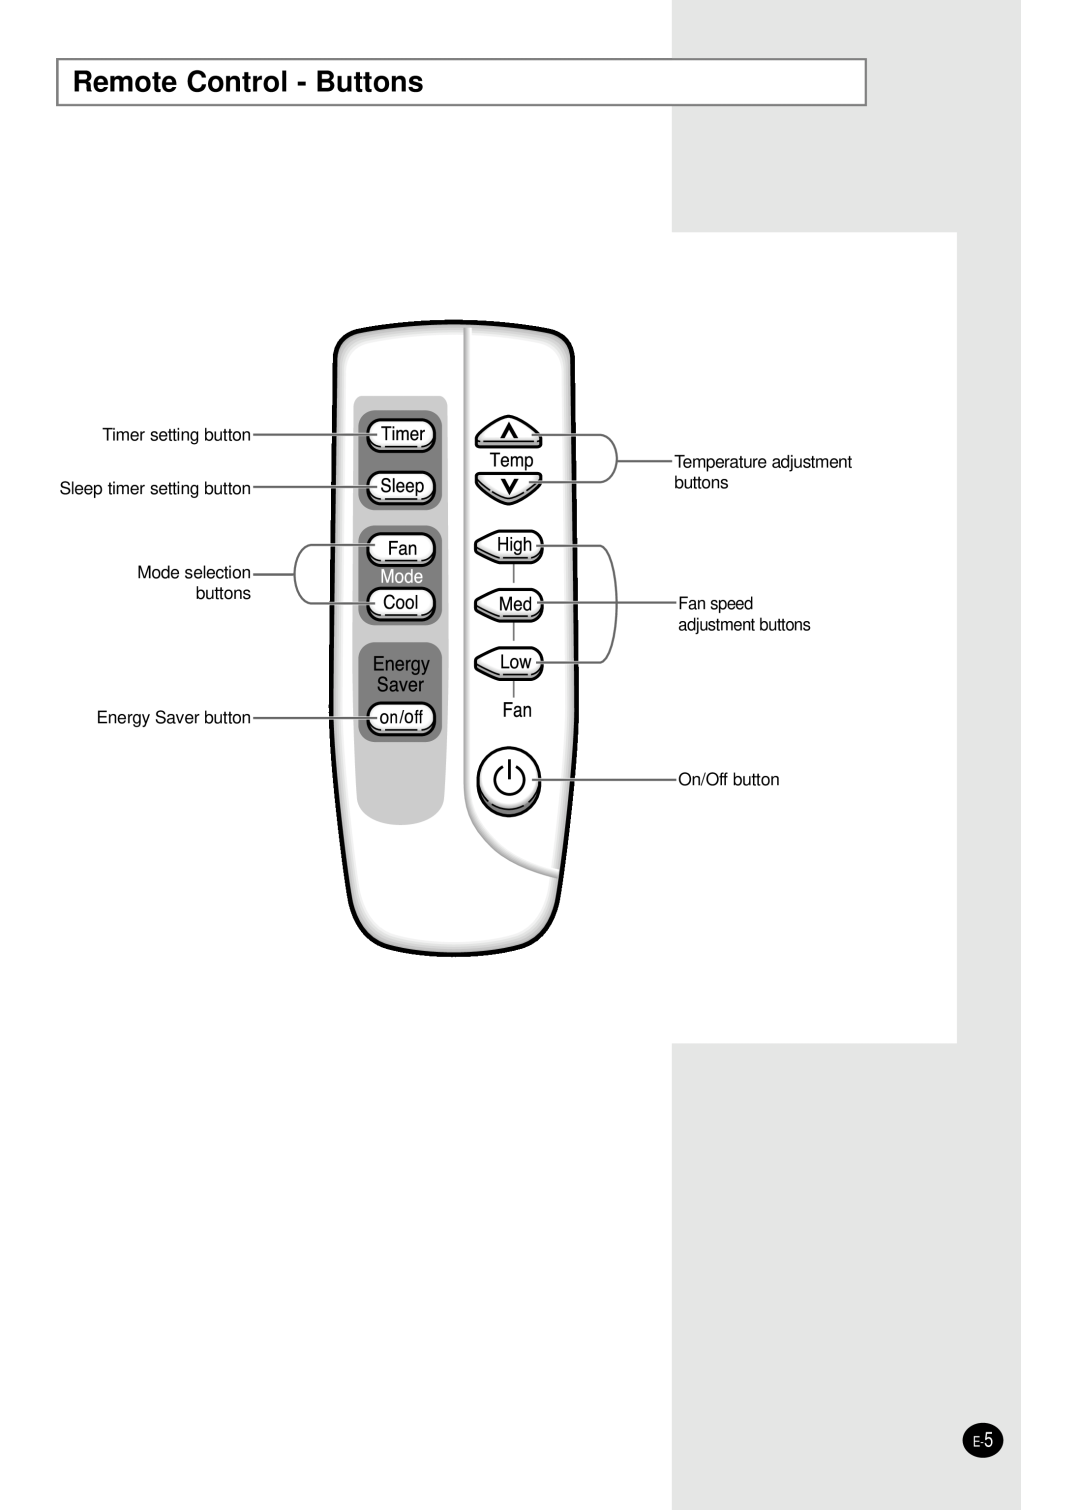 Samsung AW0501B Remote Control - Buttons, Timer setting button Sleep timer setting button, Temperature adjustment buttons 